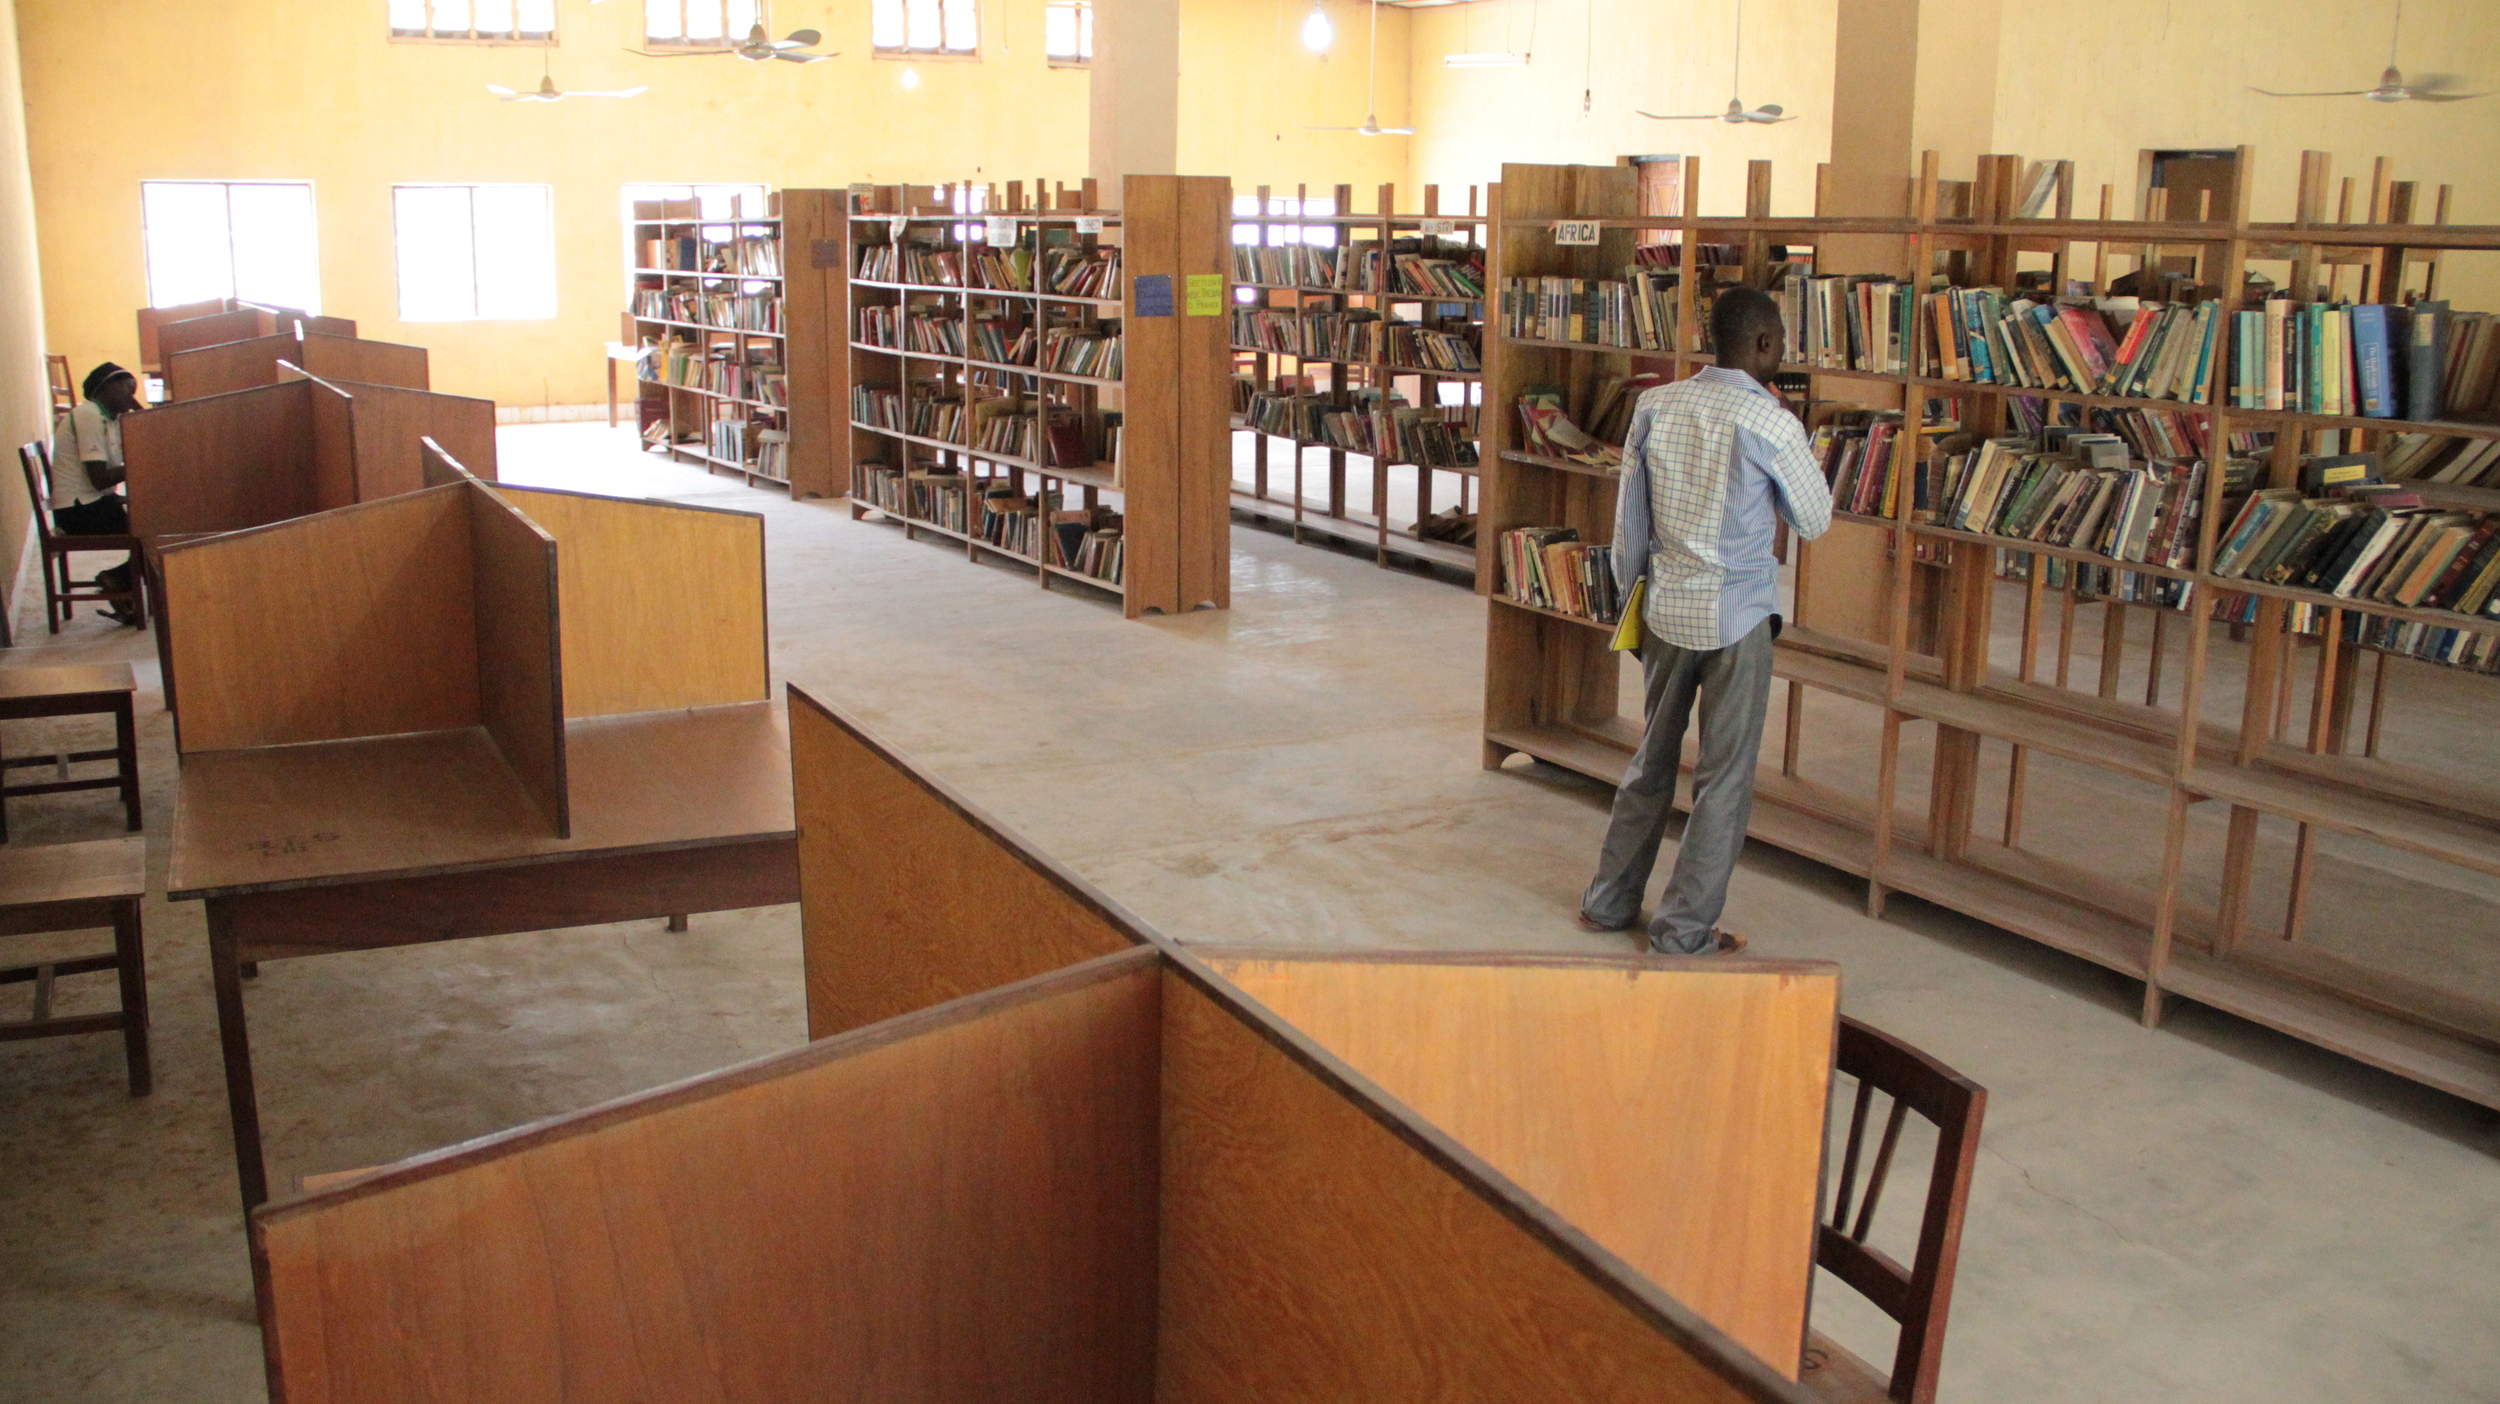  R. Job Library main collection room 